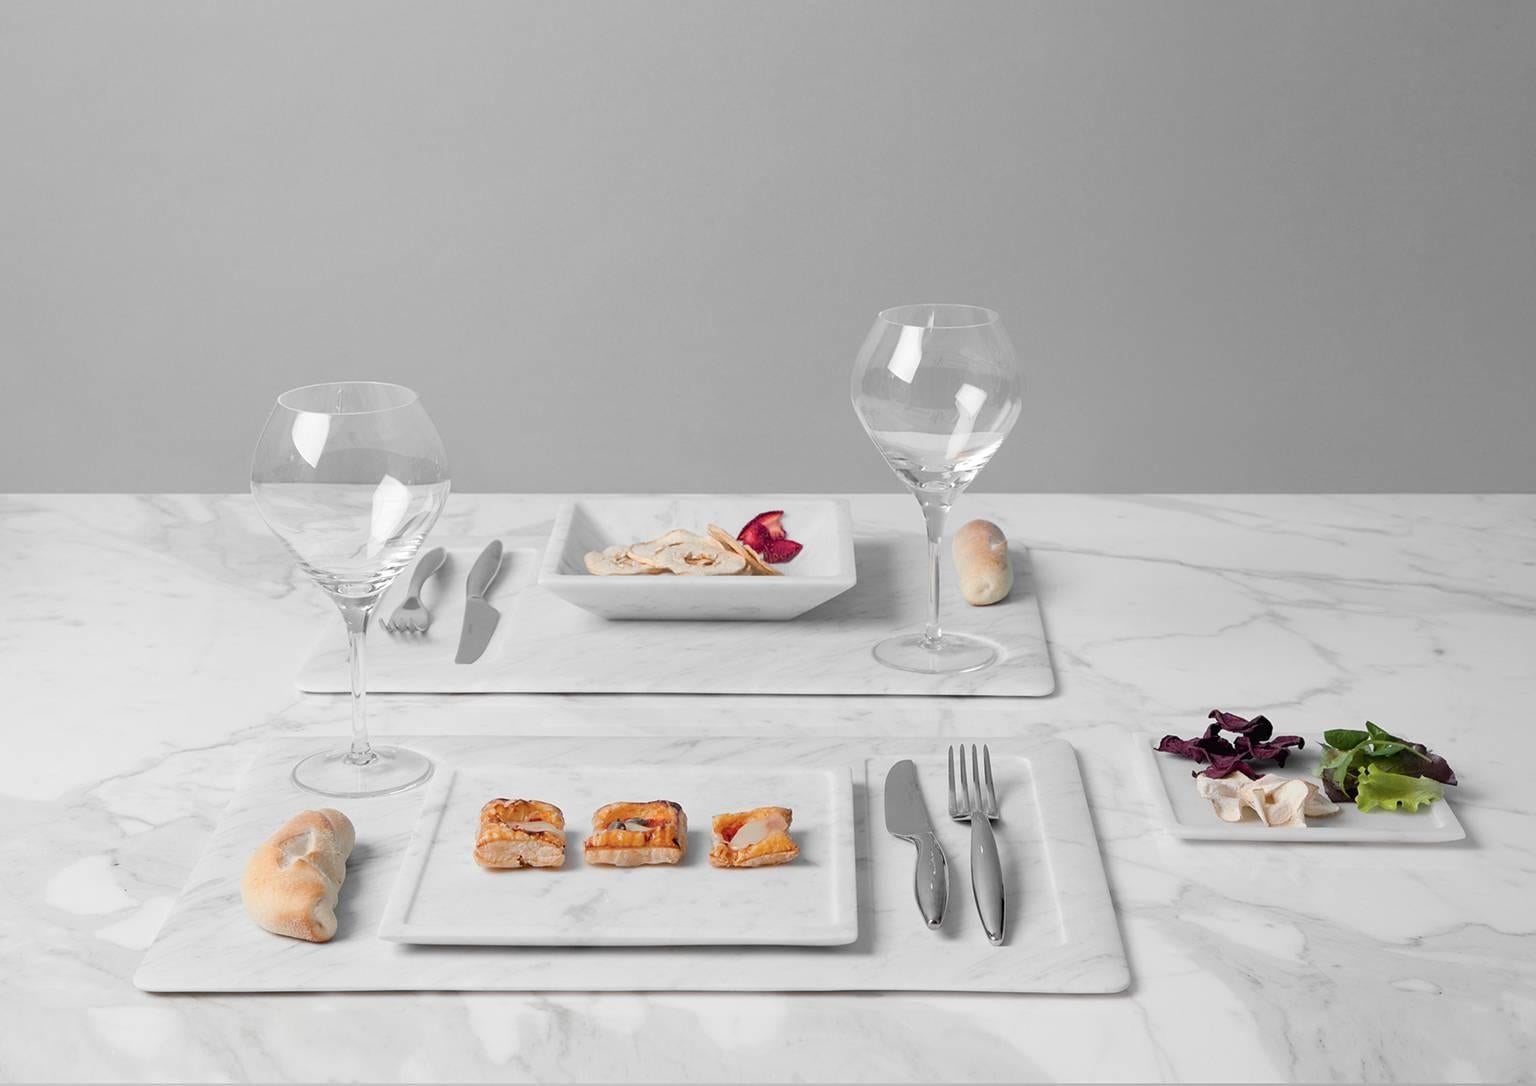 Having abandoned soft and linear shapes, Studioformart has considered a rational and perfectly functional dining set. Soup plate, dinner plate and dessert plate, Square is a declaration of intent: square, even shapes, honest through the purity and